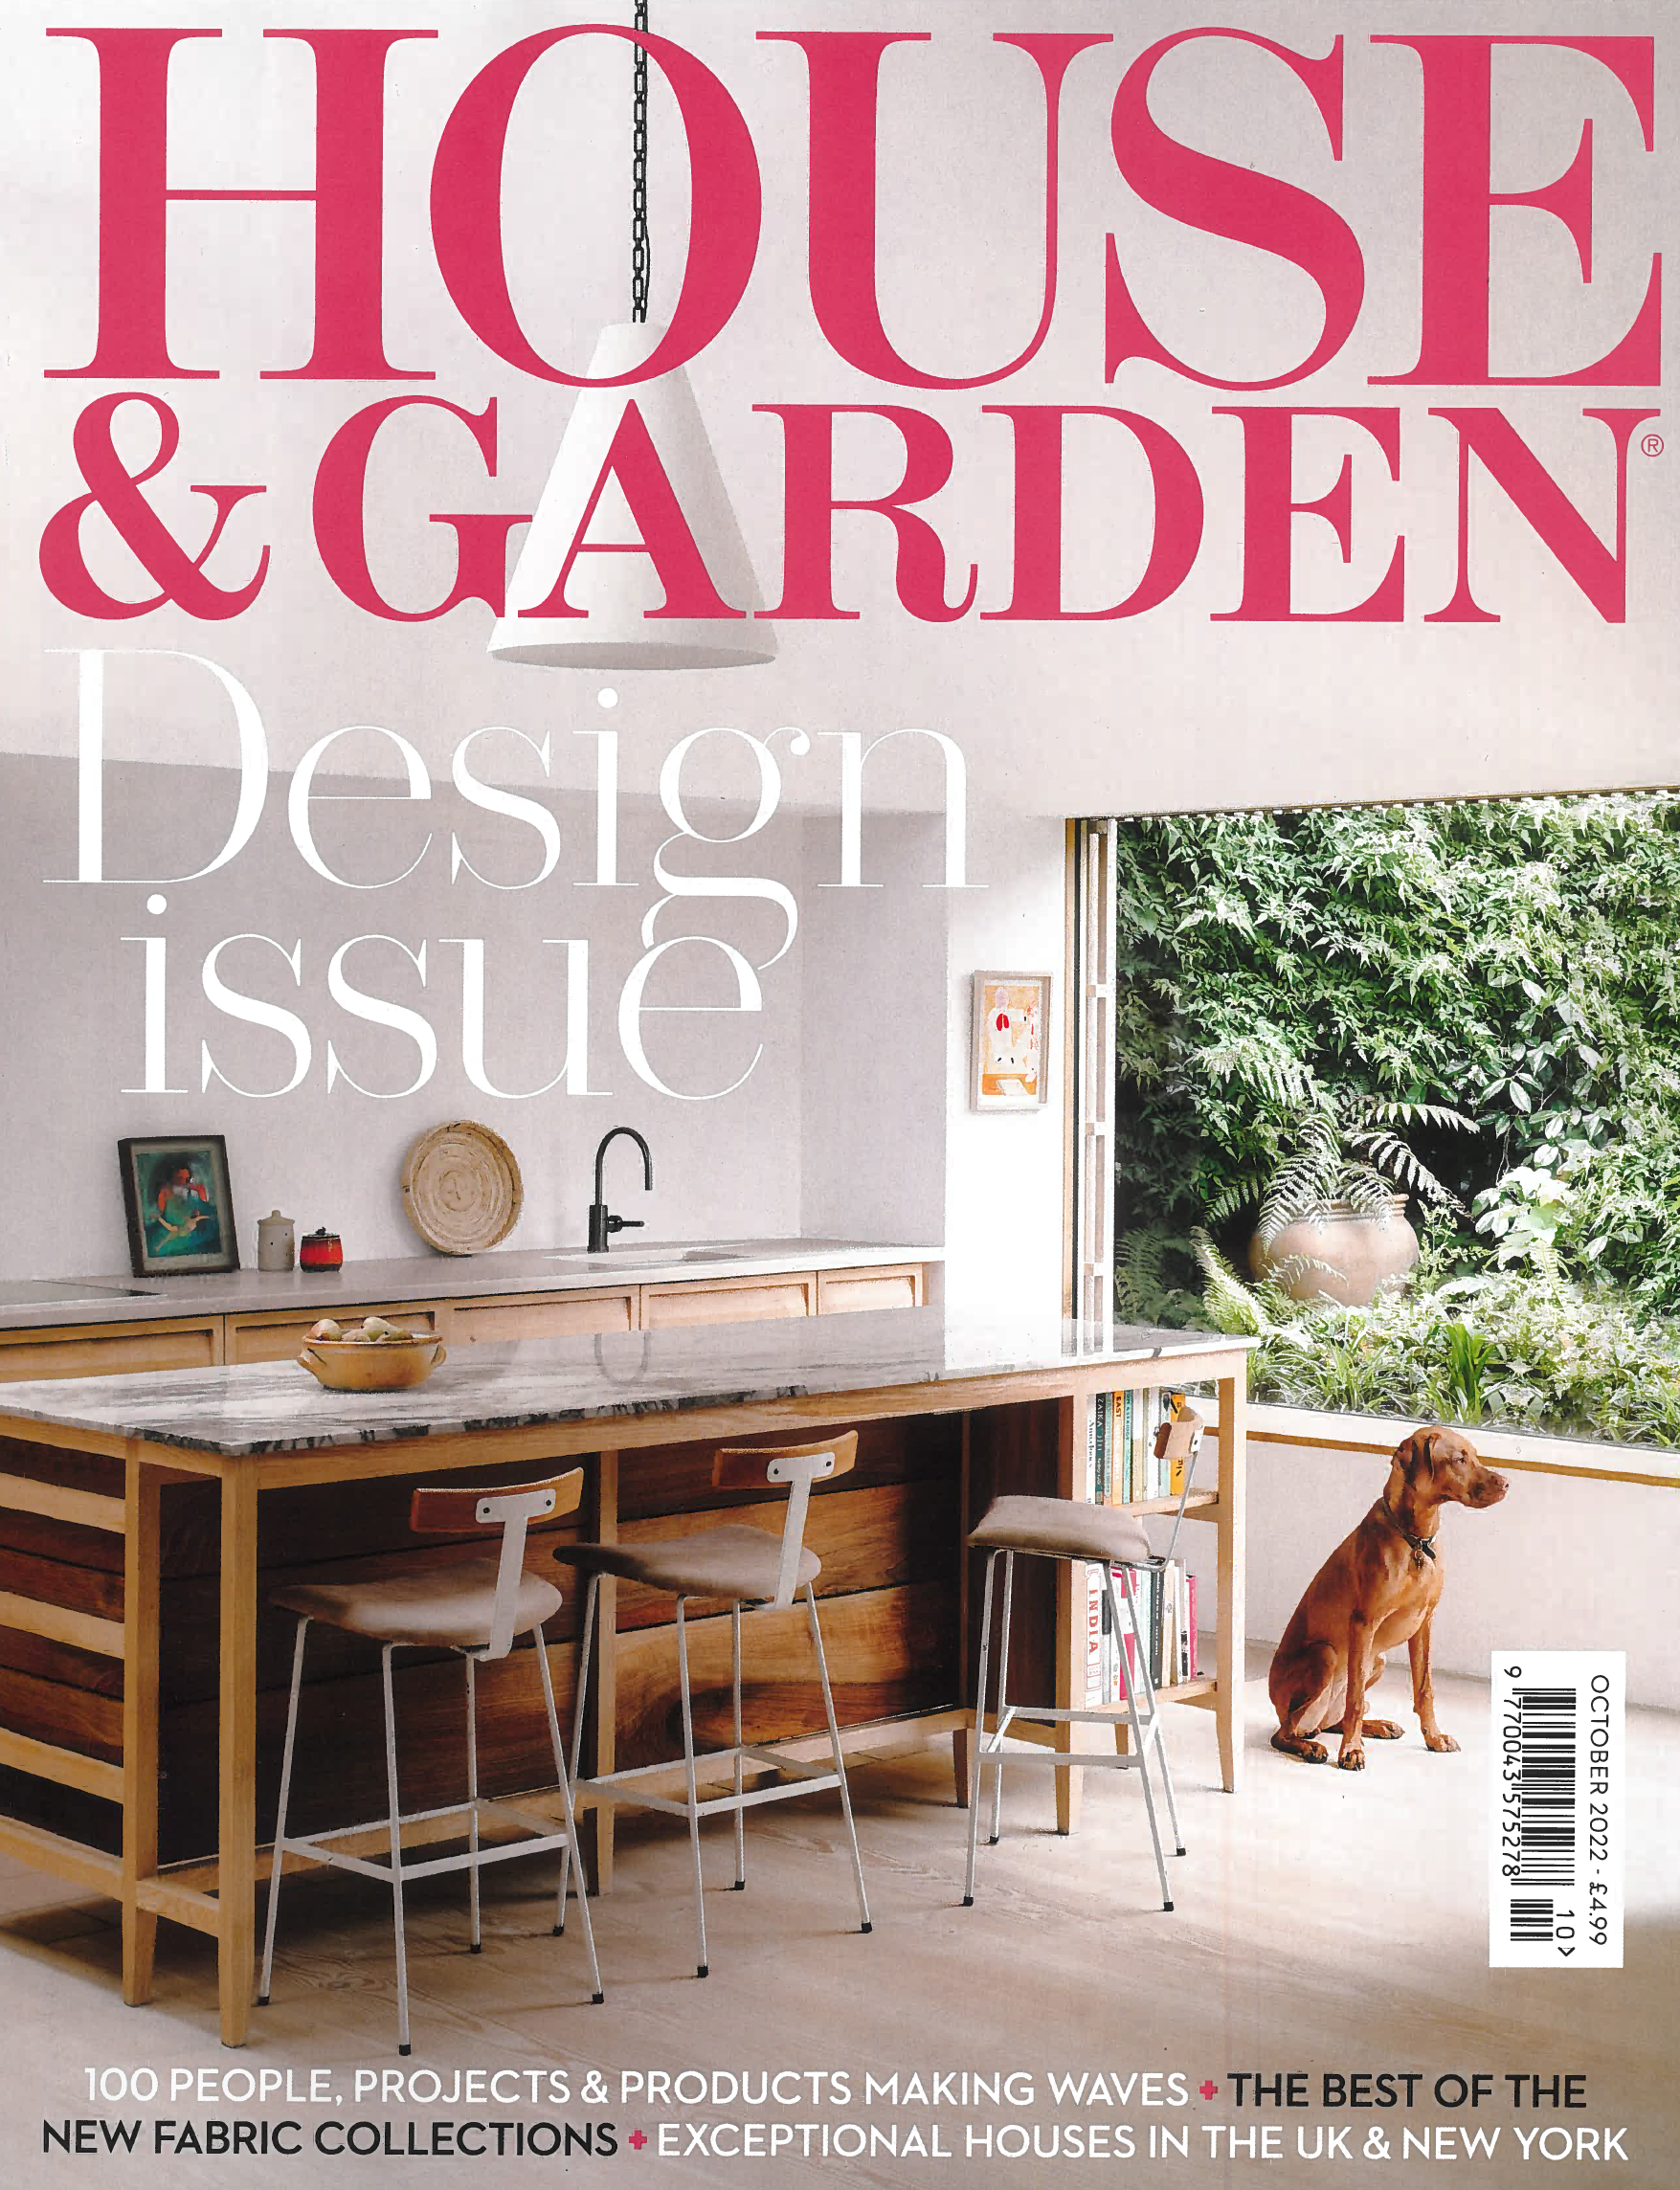 Magazine cover featuring modern style kitchen